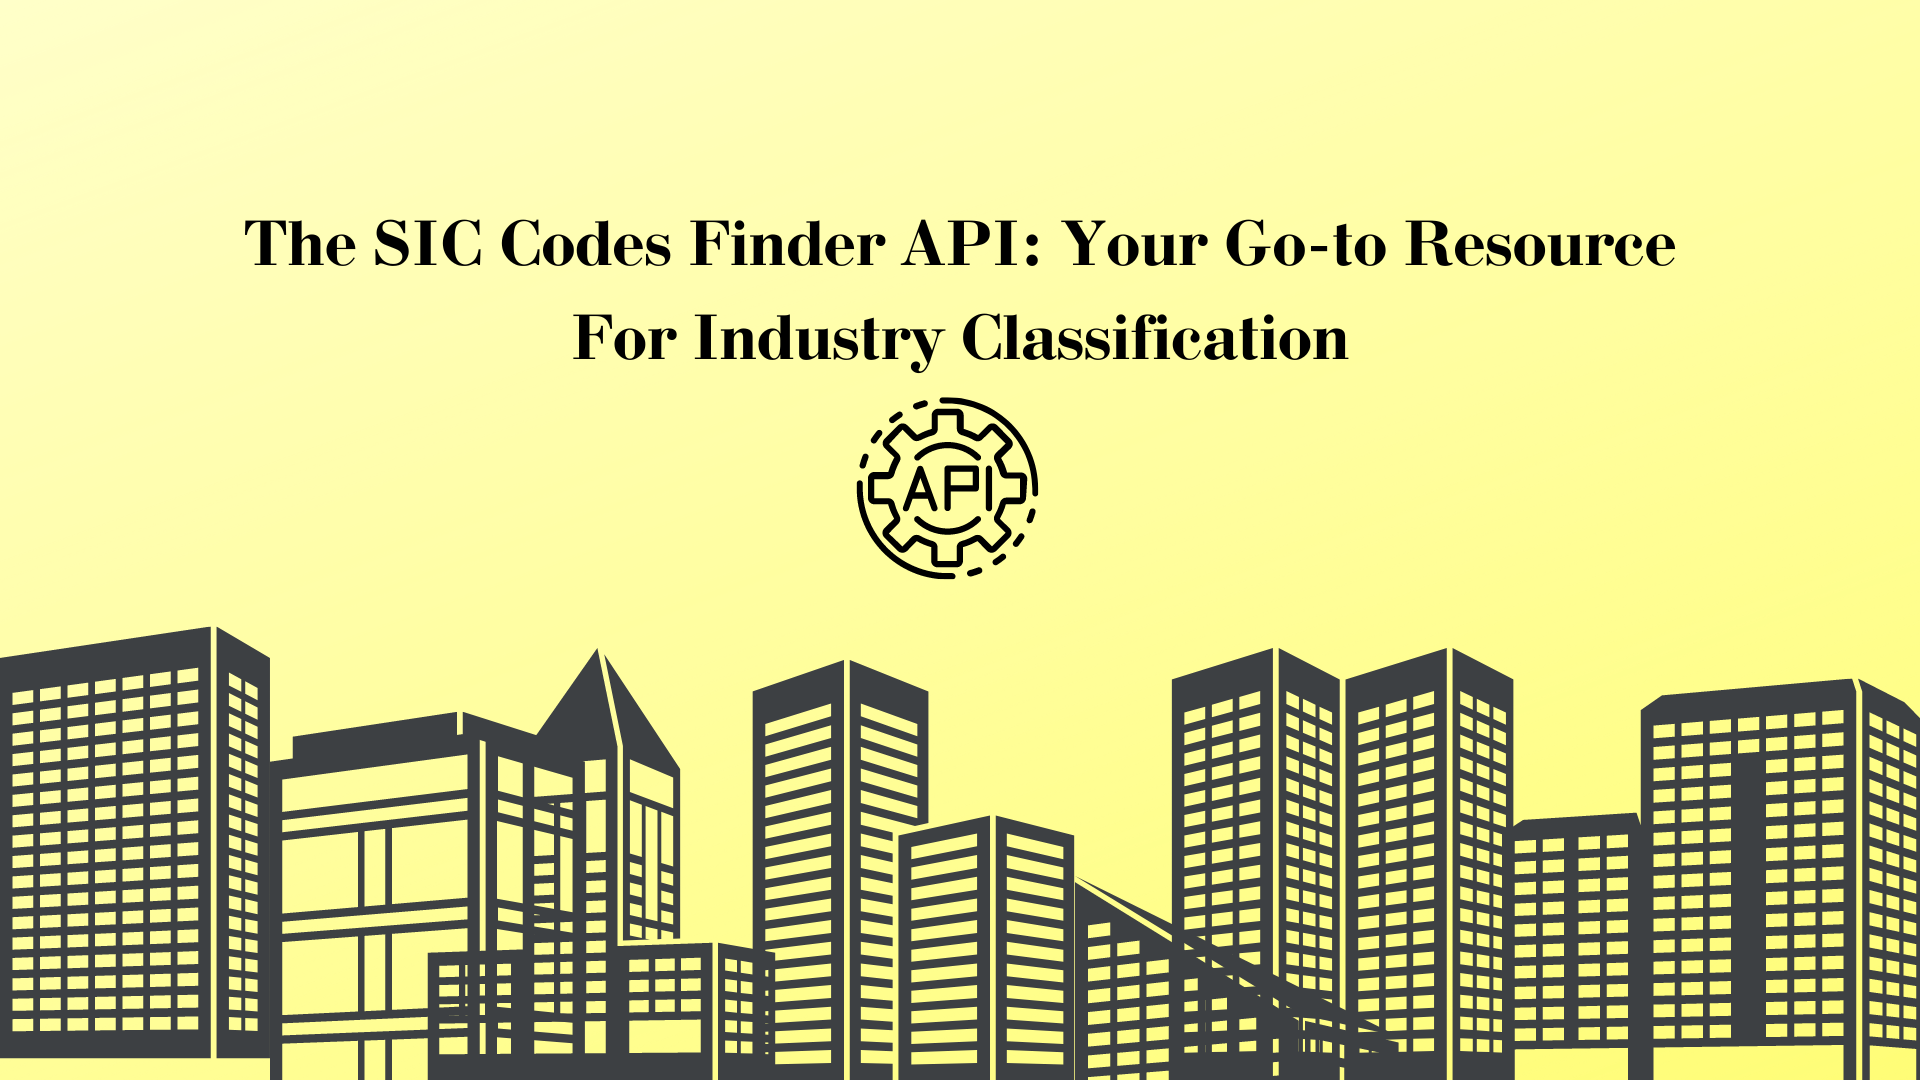 The SIC Codes Finder API: Your Go-to Resource For Industry Classification